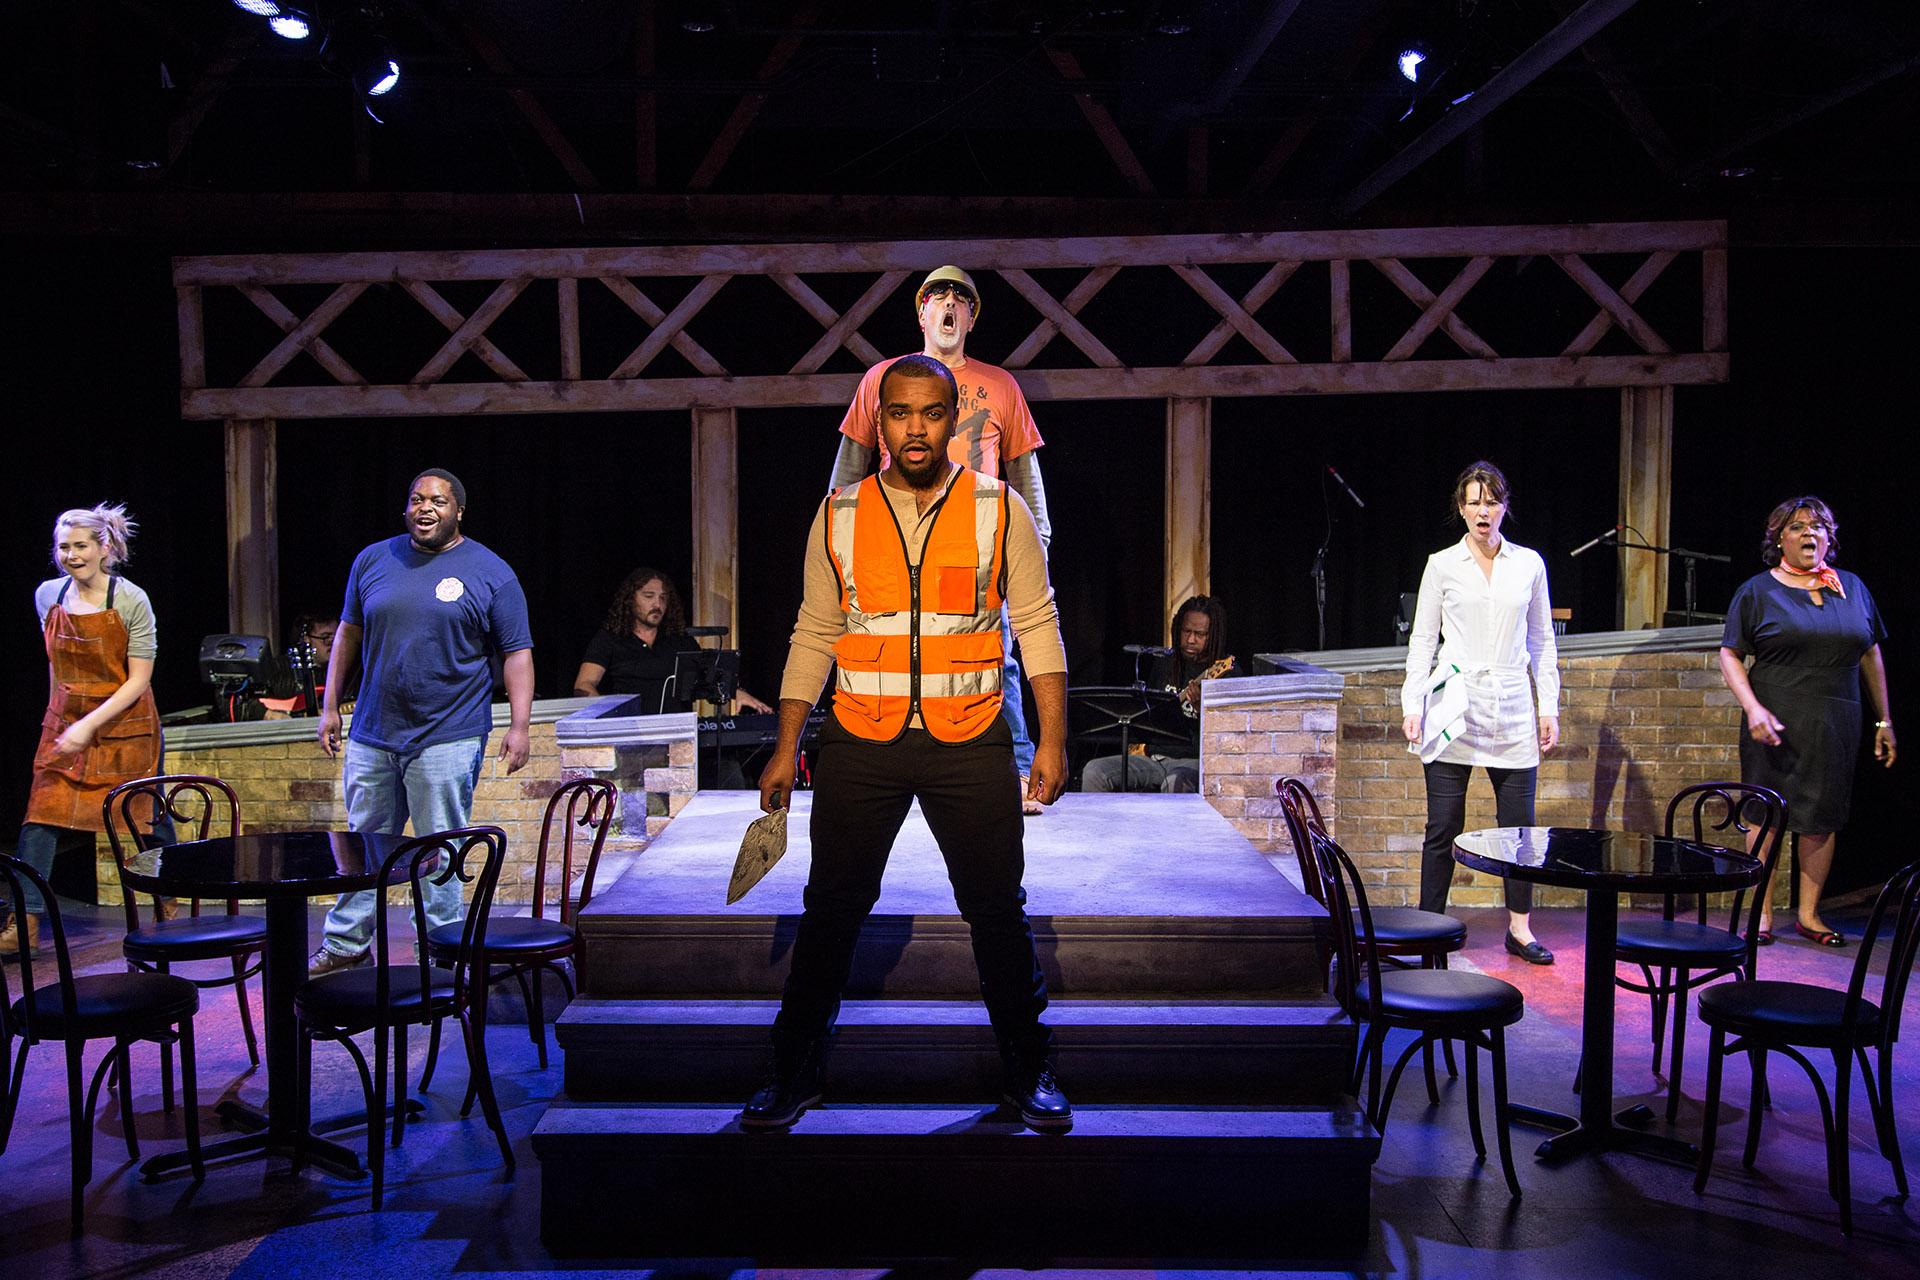 Kiersten Frumkin (left to right), Jared David Michael Grant, Stephen Blu Allen, Michael Kingston, Loretta Rezos and Cynthia F. Carter in “Working.” Background, in band are Perry Cowdery (left to right), Jeremy Ramey and Rafe Bradford. (Photo by Austin Oie Photography) 